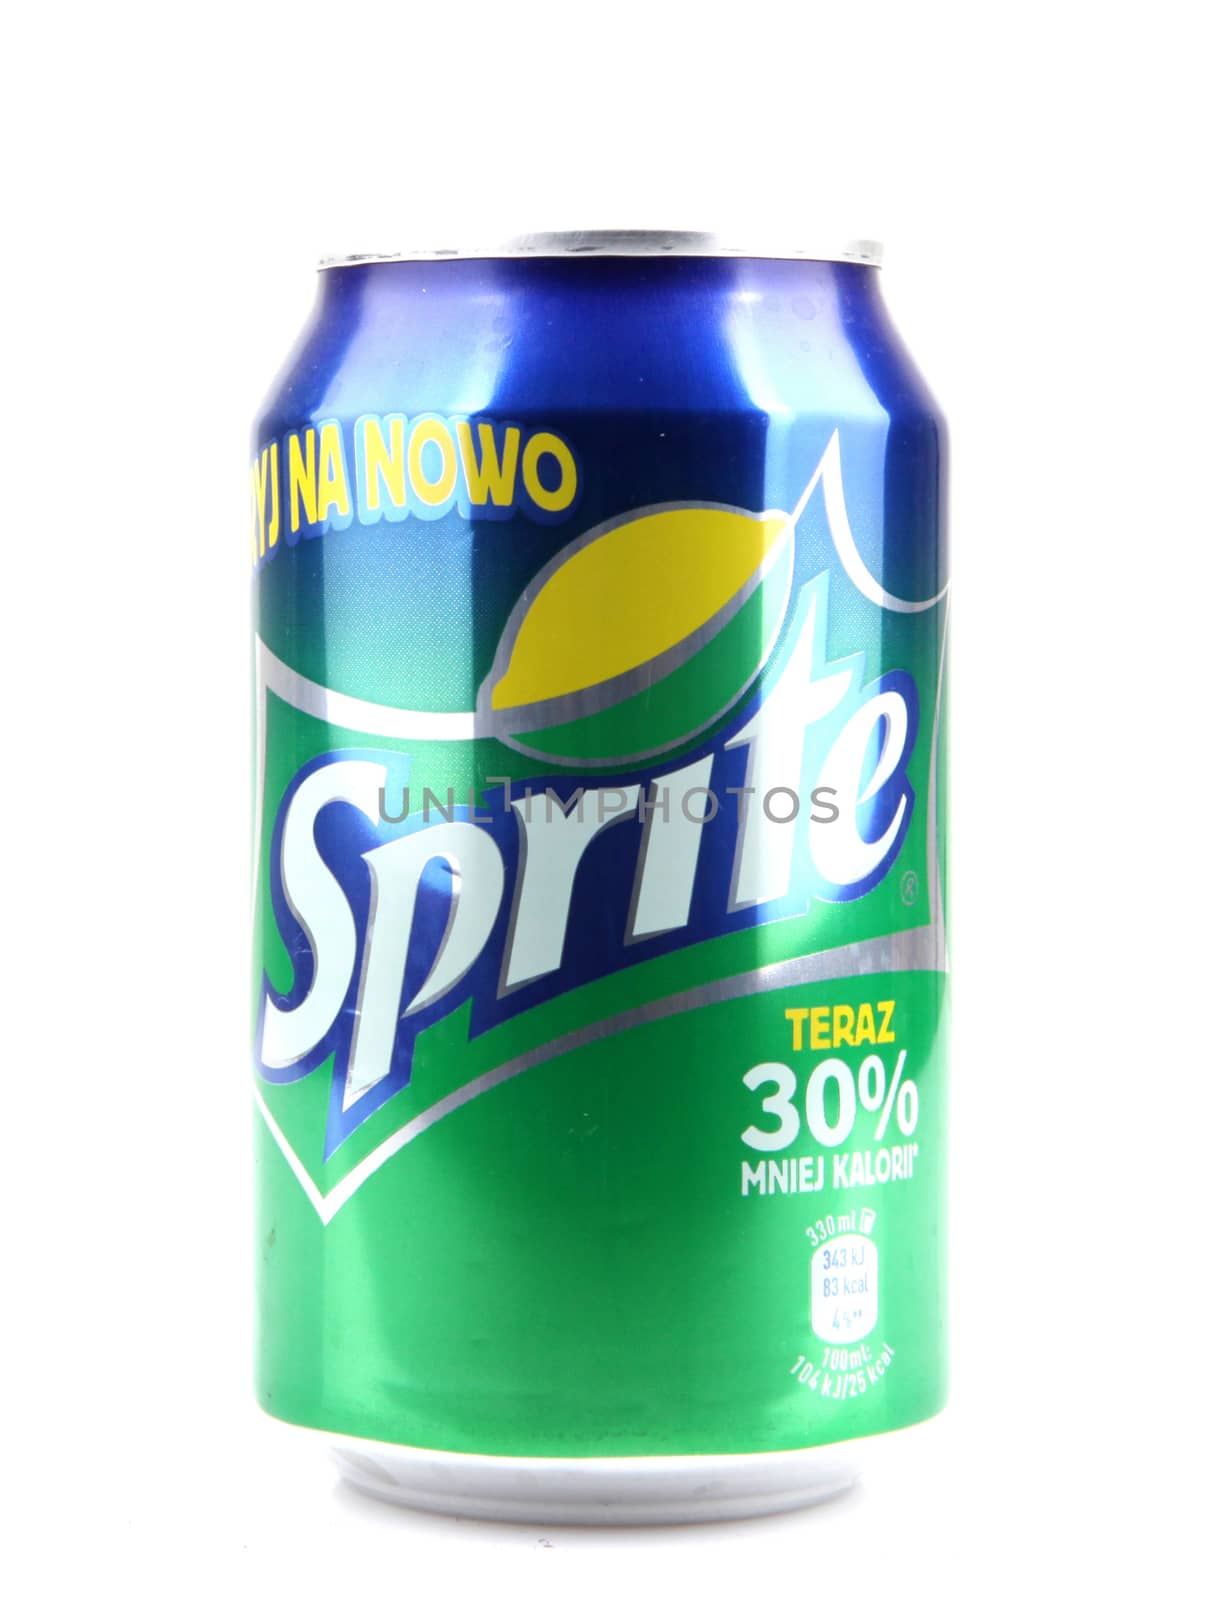 AYTOS, BULGARIA - APRIL 03, 2016: Sprite isolated on white background. Sprite is a colorless, lemon-lime flavored, caffeine-free soft drink, created by the Coca-Cola Company.